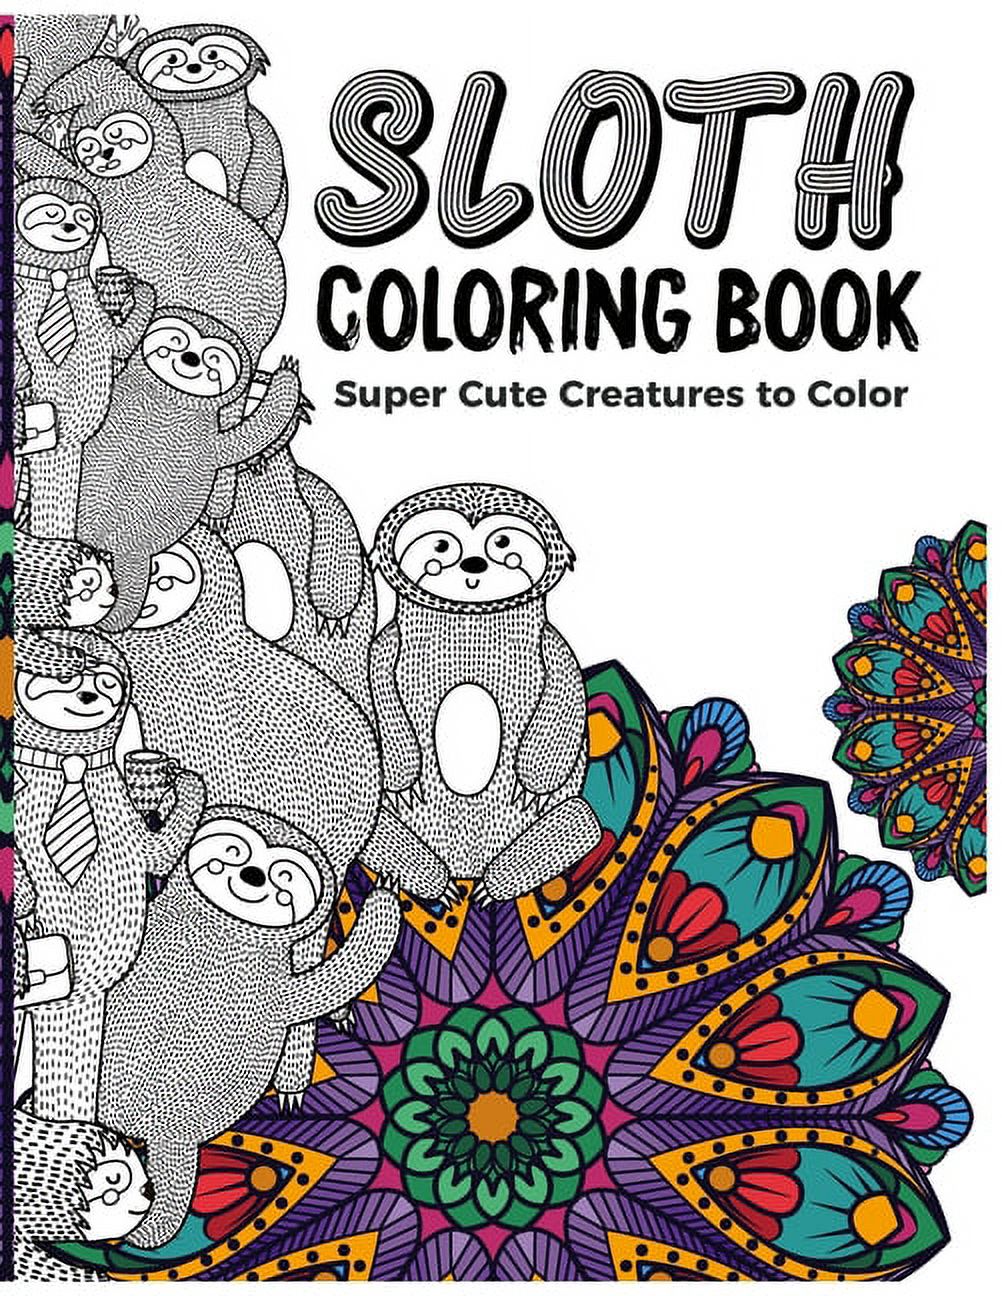 Sloth Coloring Book for Adults: (Animal Coloring Books for Adults): Sloth Coloring Book for Adults Sloth Coloring Book Easy Sloth Coloring Book Large Sloth Coloring Book with Pencils, Sloth Coloring Books [Book]